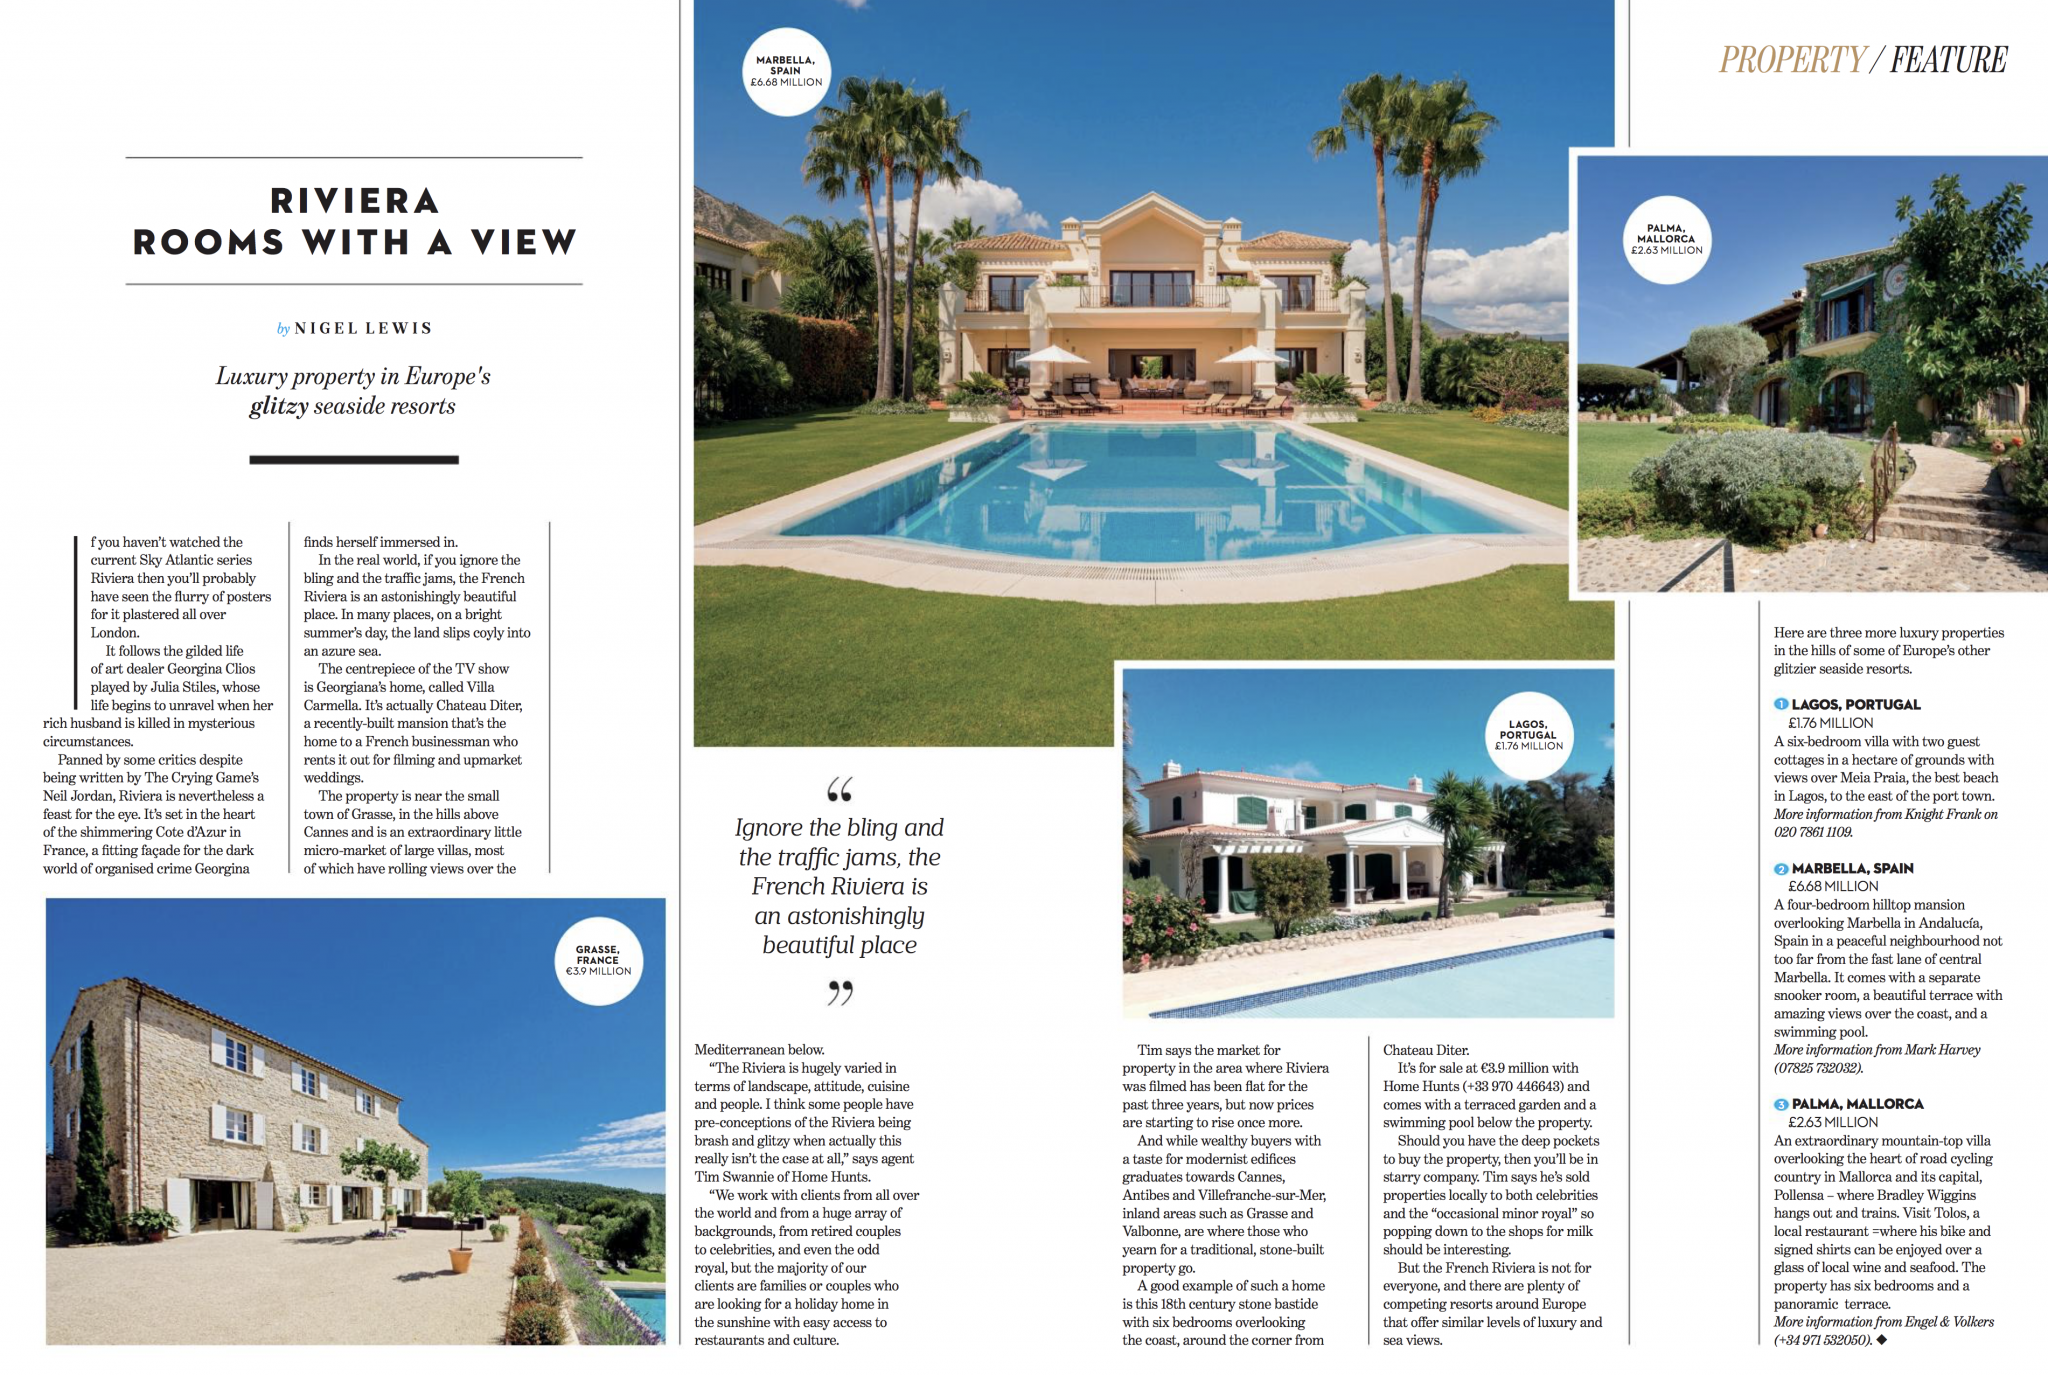 Absolutely Magazine – Riviera property feature